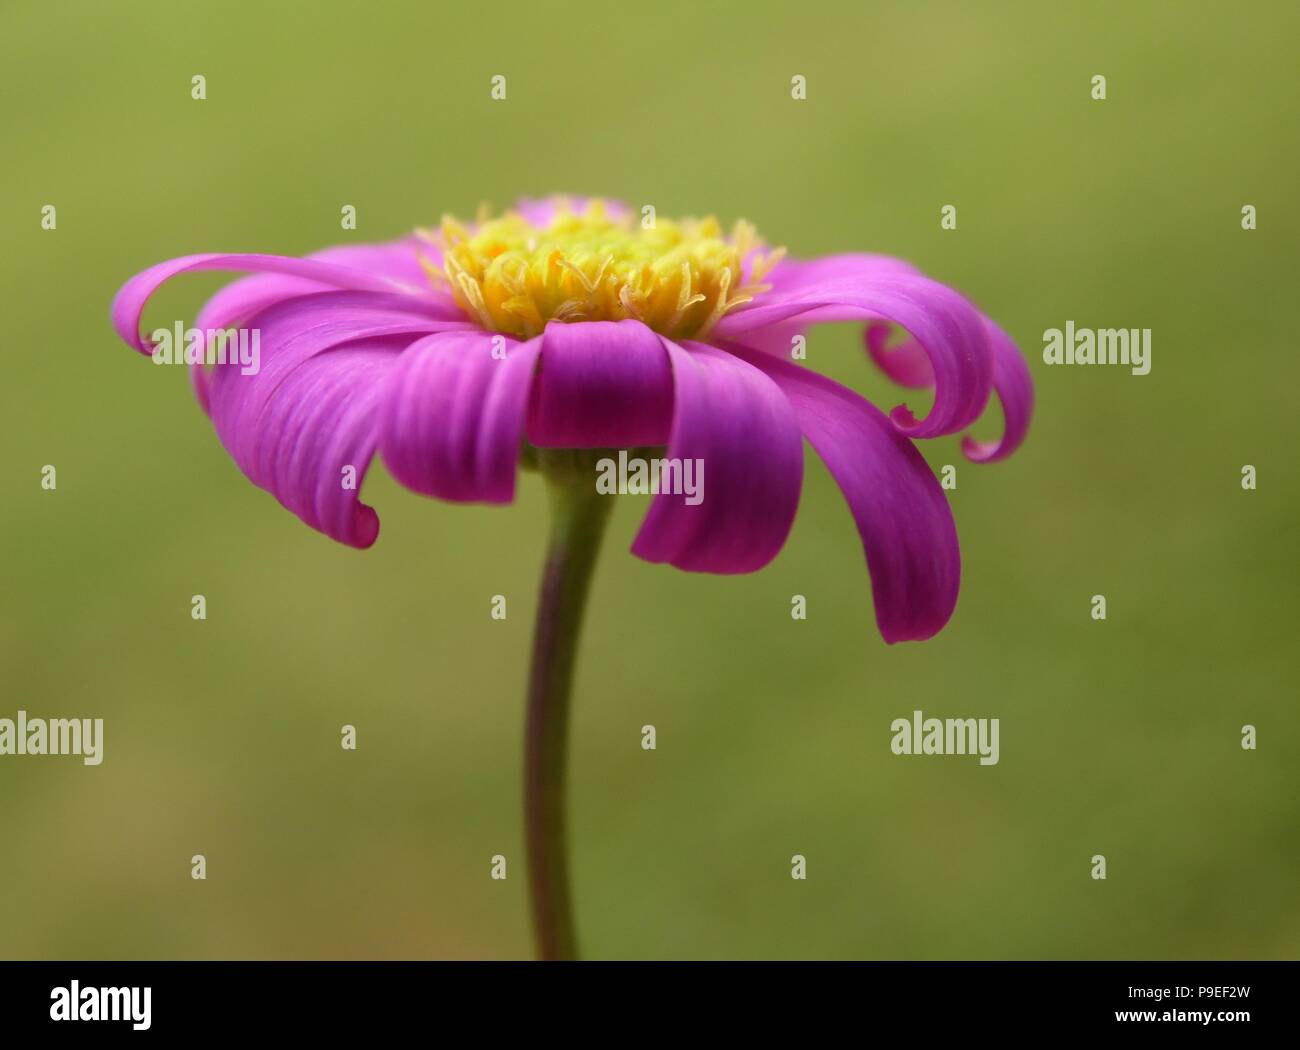 Pink Daisy Flower with Curled Petals Stock Photo